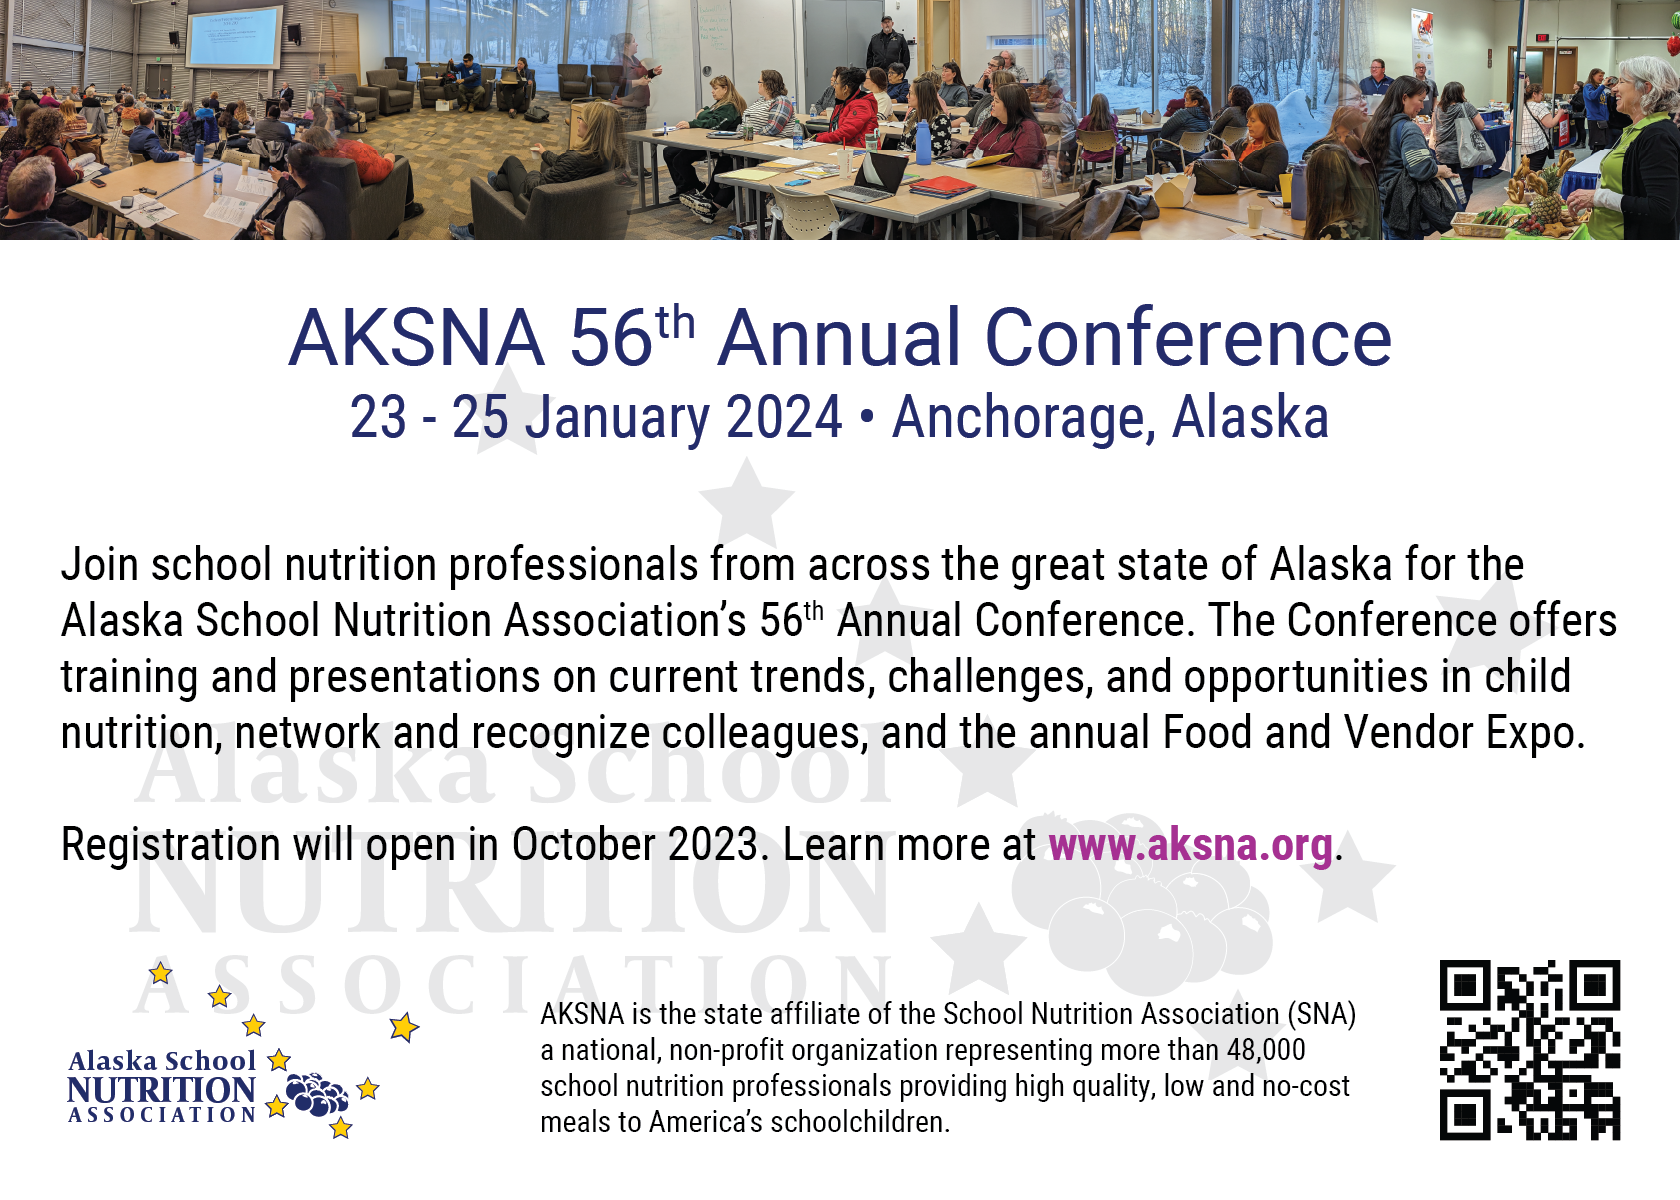 Save the Date: AKSNA 56th Annual Conference is 23 - 25 January 2024 in Anchorage, Alaska. Registration will open in October 2023.